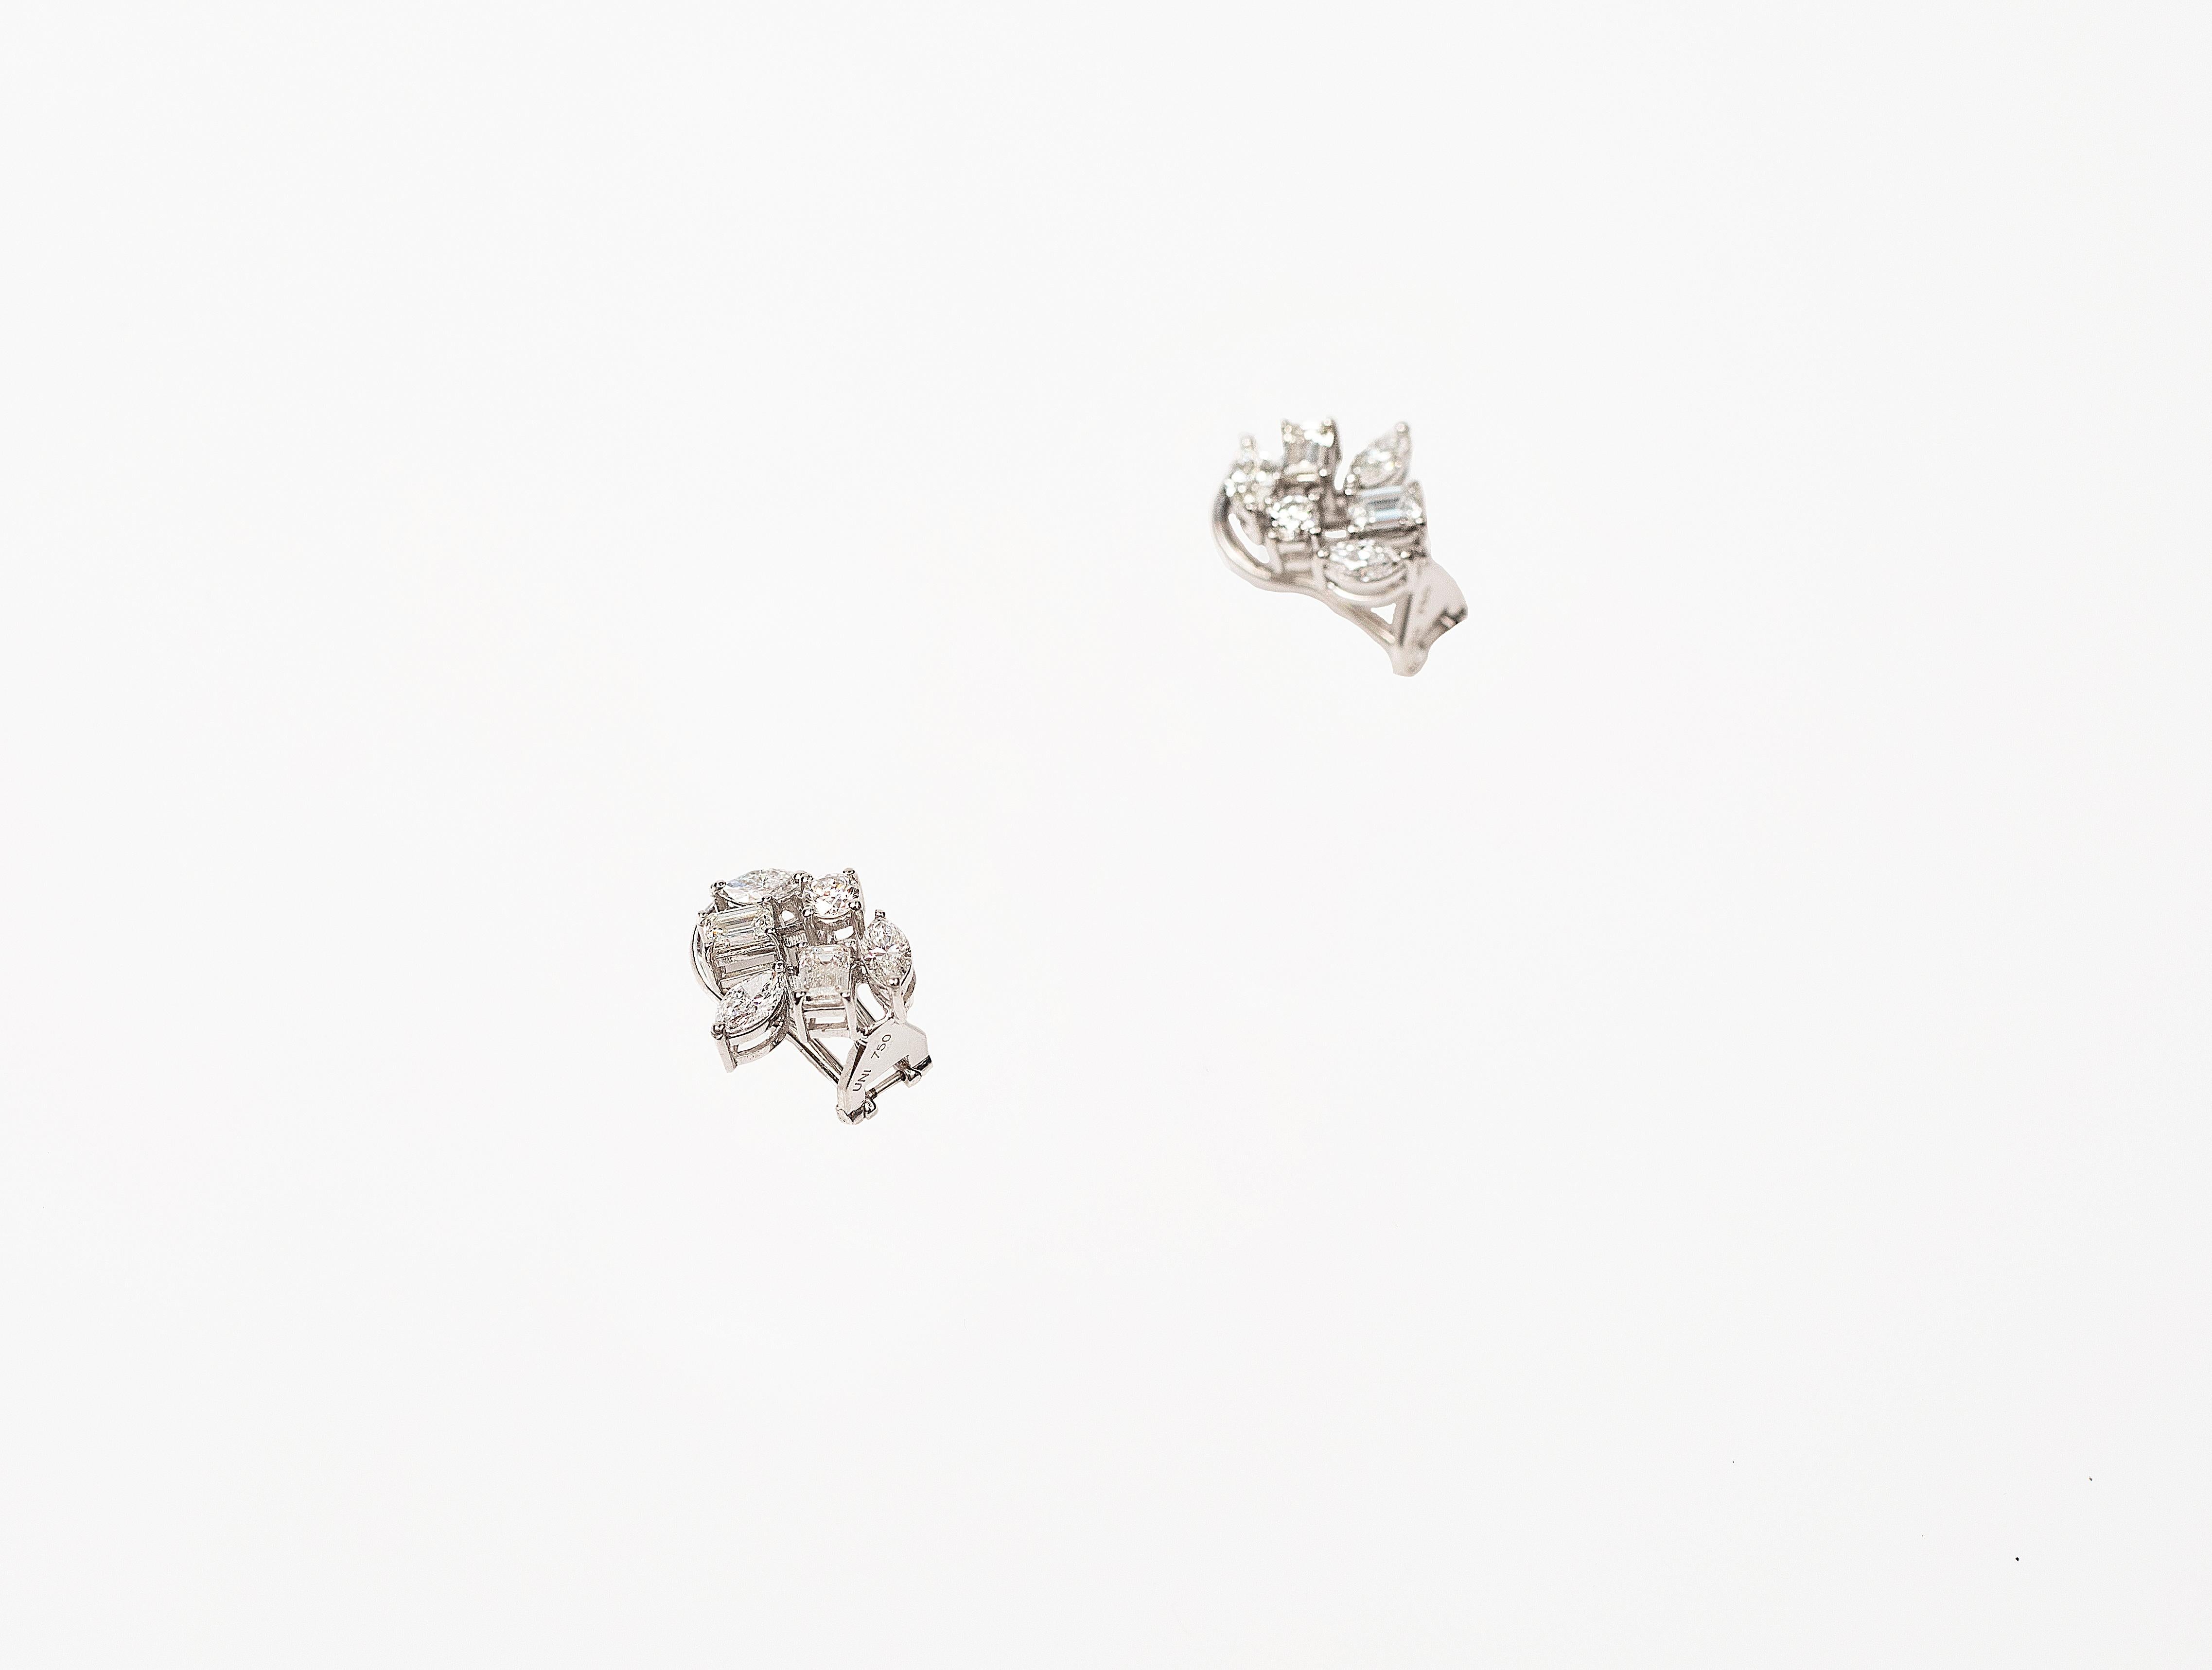 Handcrafted Studs Earrings in 18K Gold Studded with Stubbies, Marquise and Round Shape Diamond.
Gold Weight - 5.357 gms
Diamond Clarity - VS
Colour - F-G

Post and Clip System